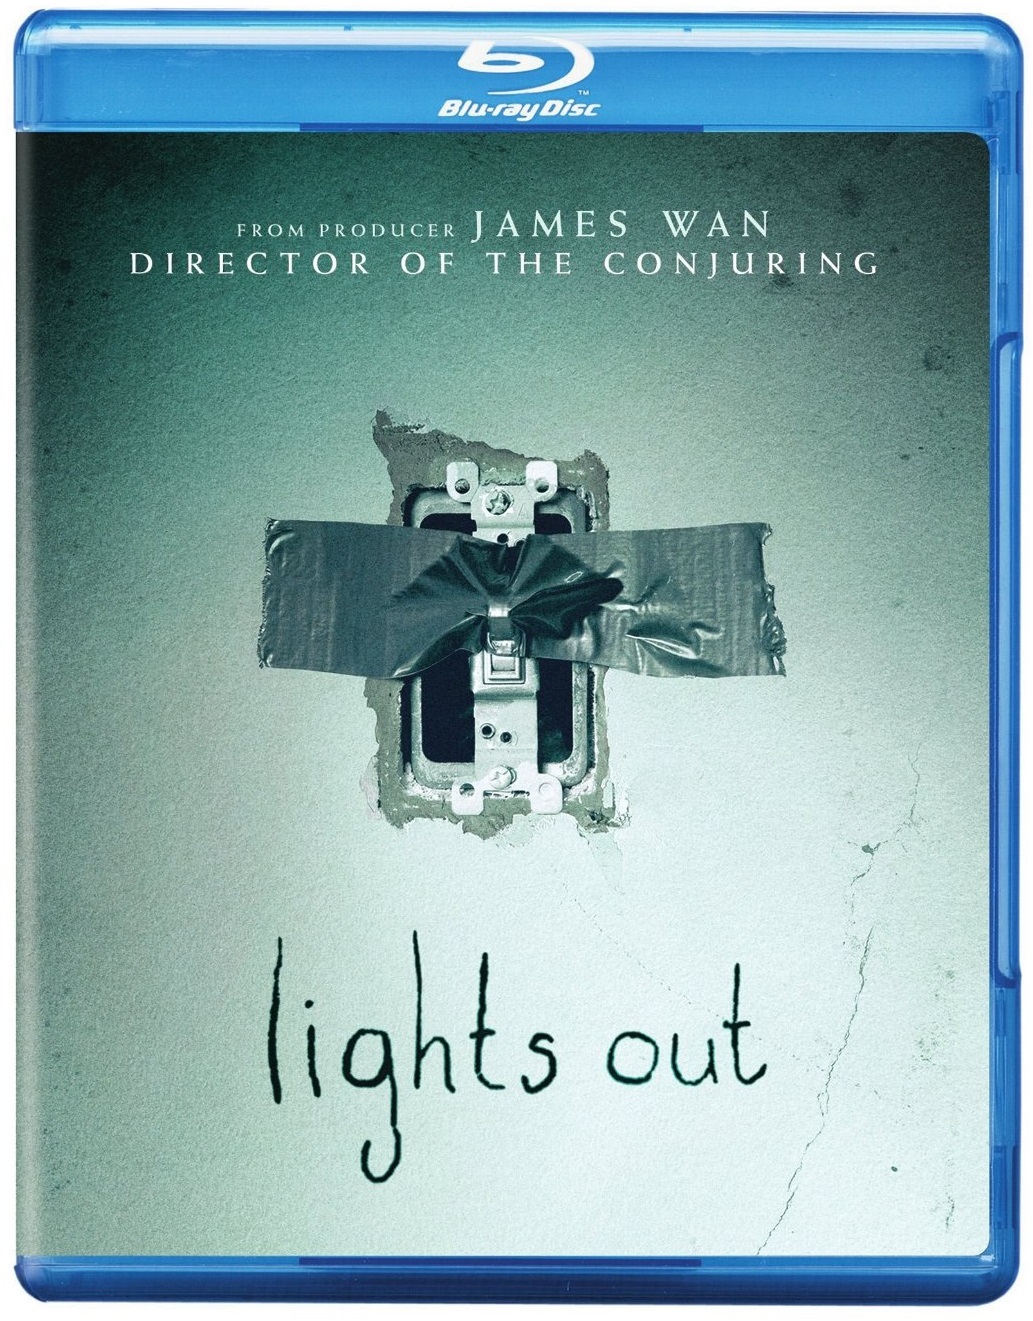 Lights Out - Blu-ray review